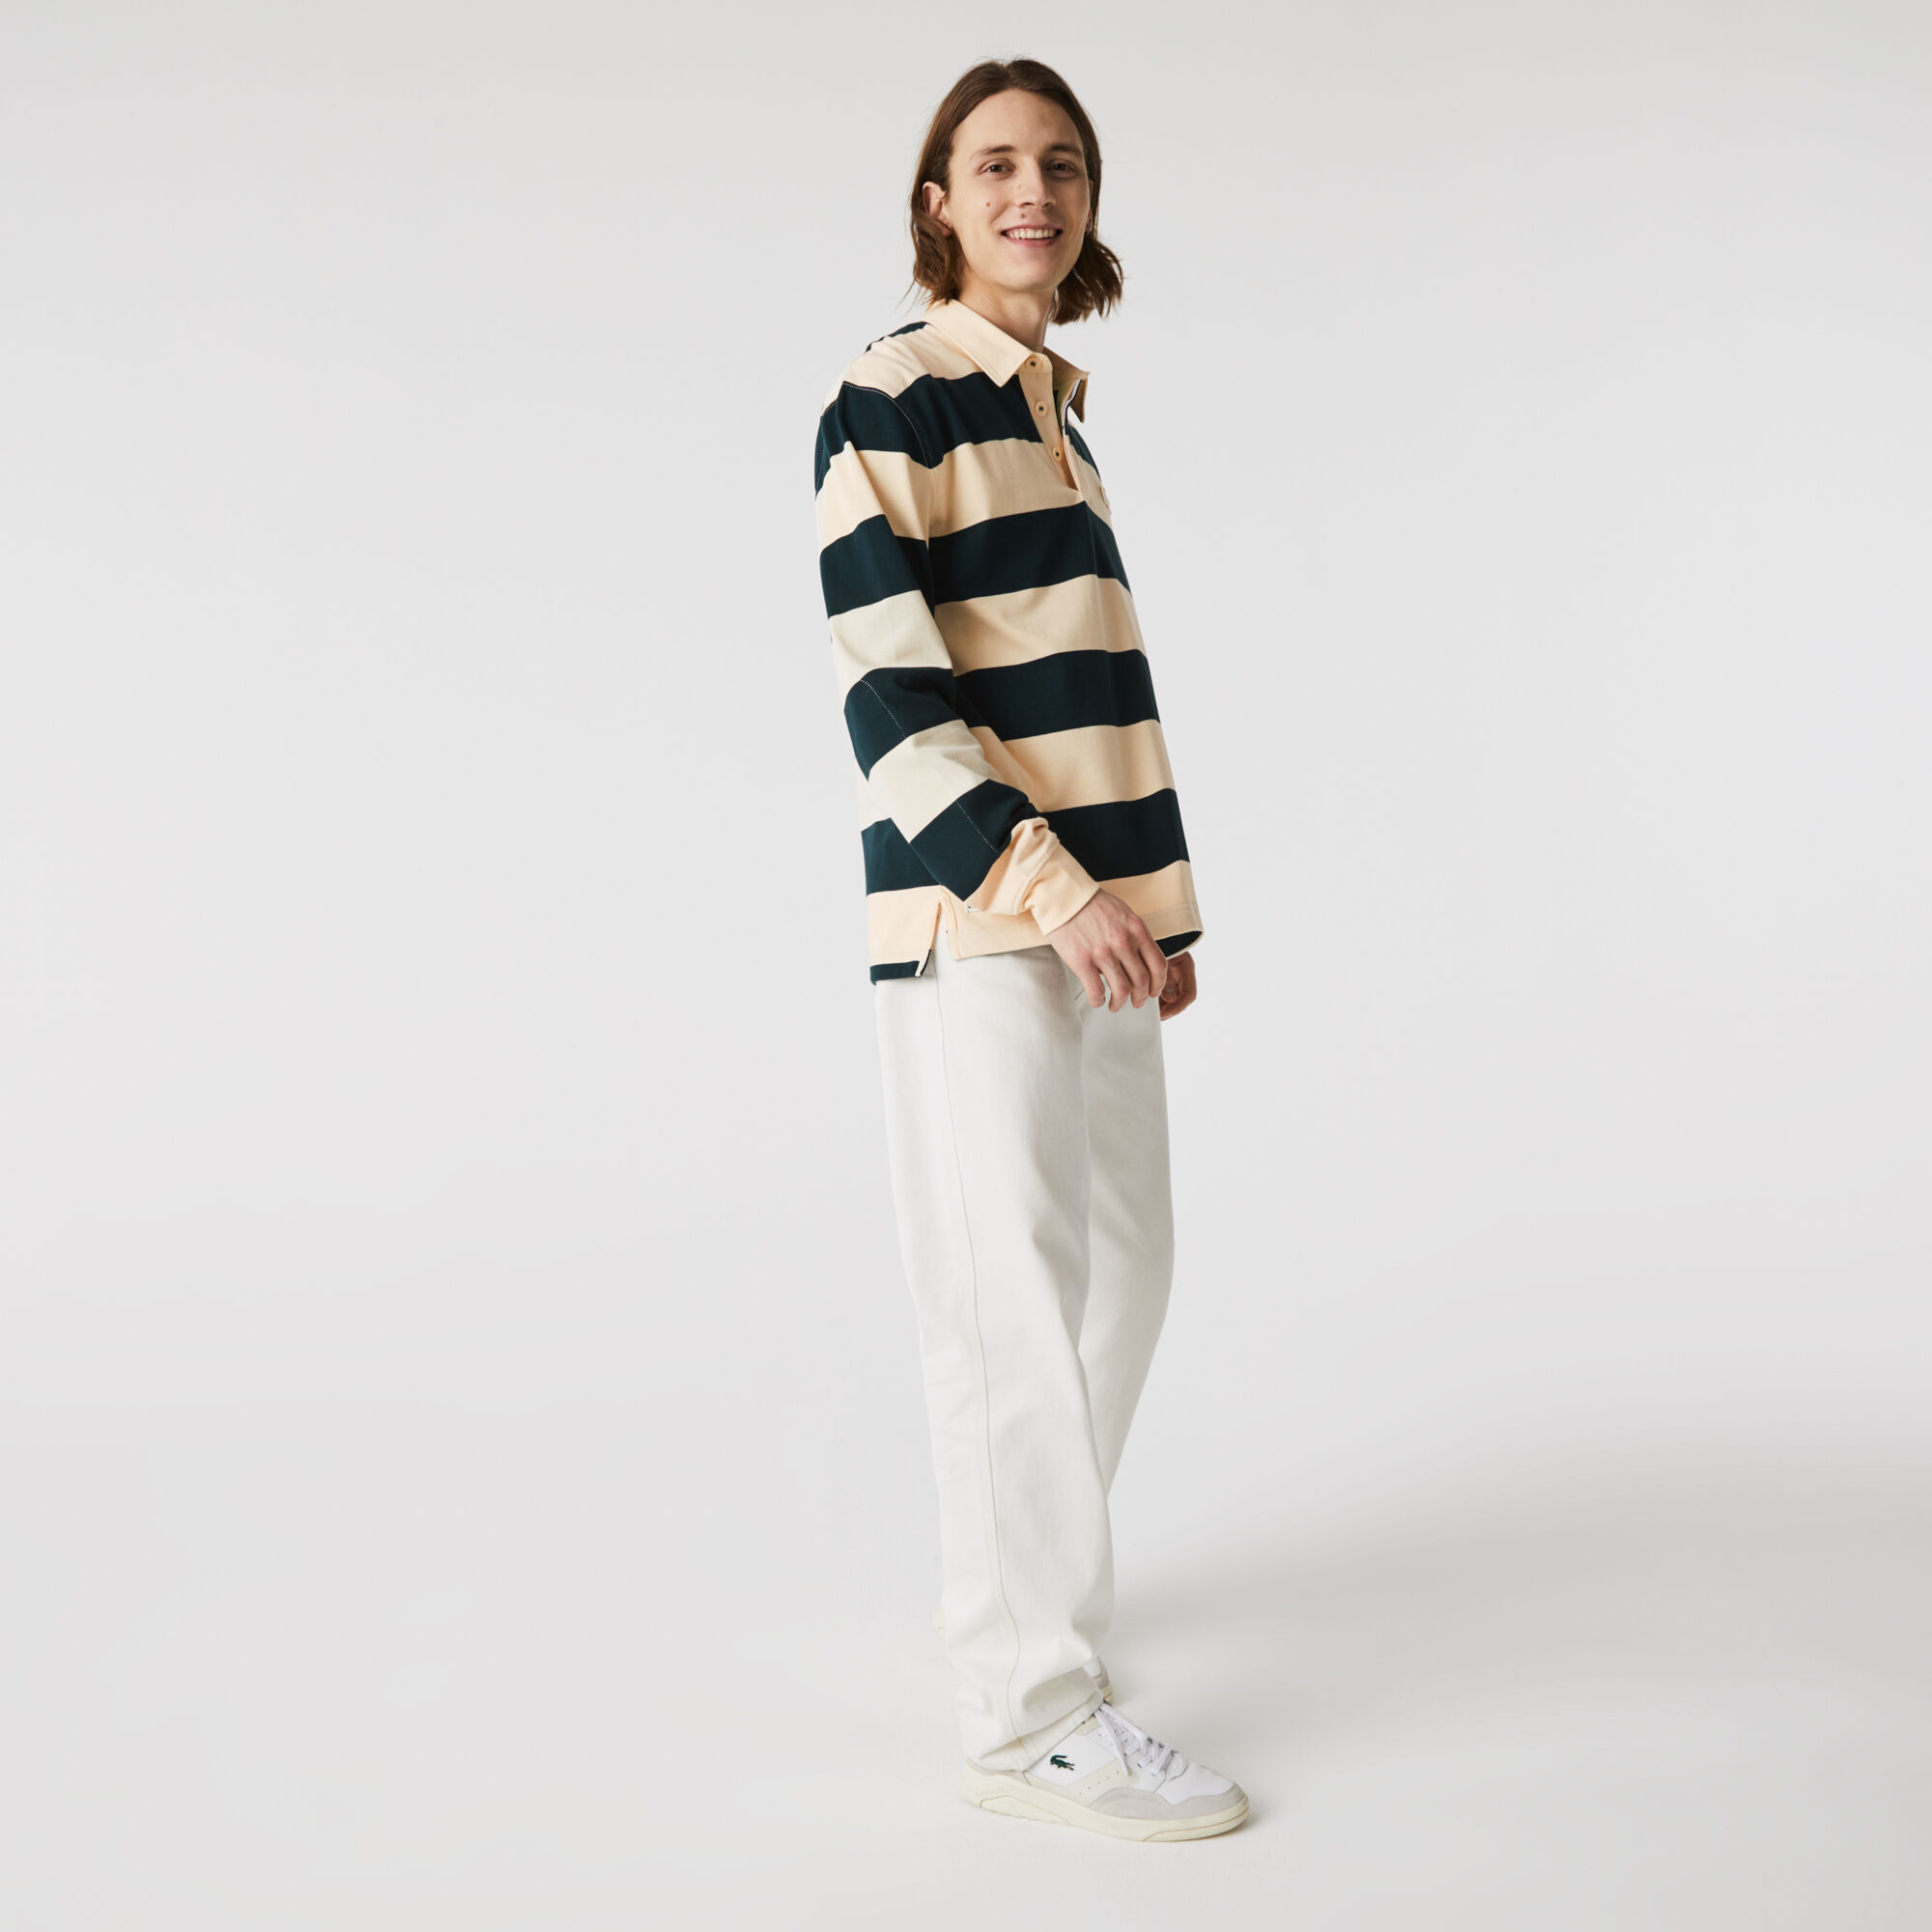 Men’s Lacoste Striped Cotton Rugby Shirt